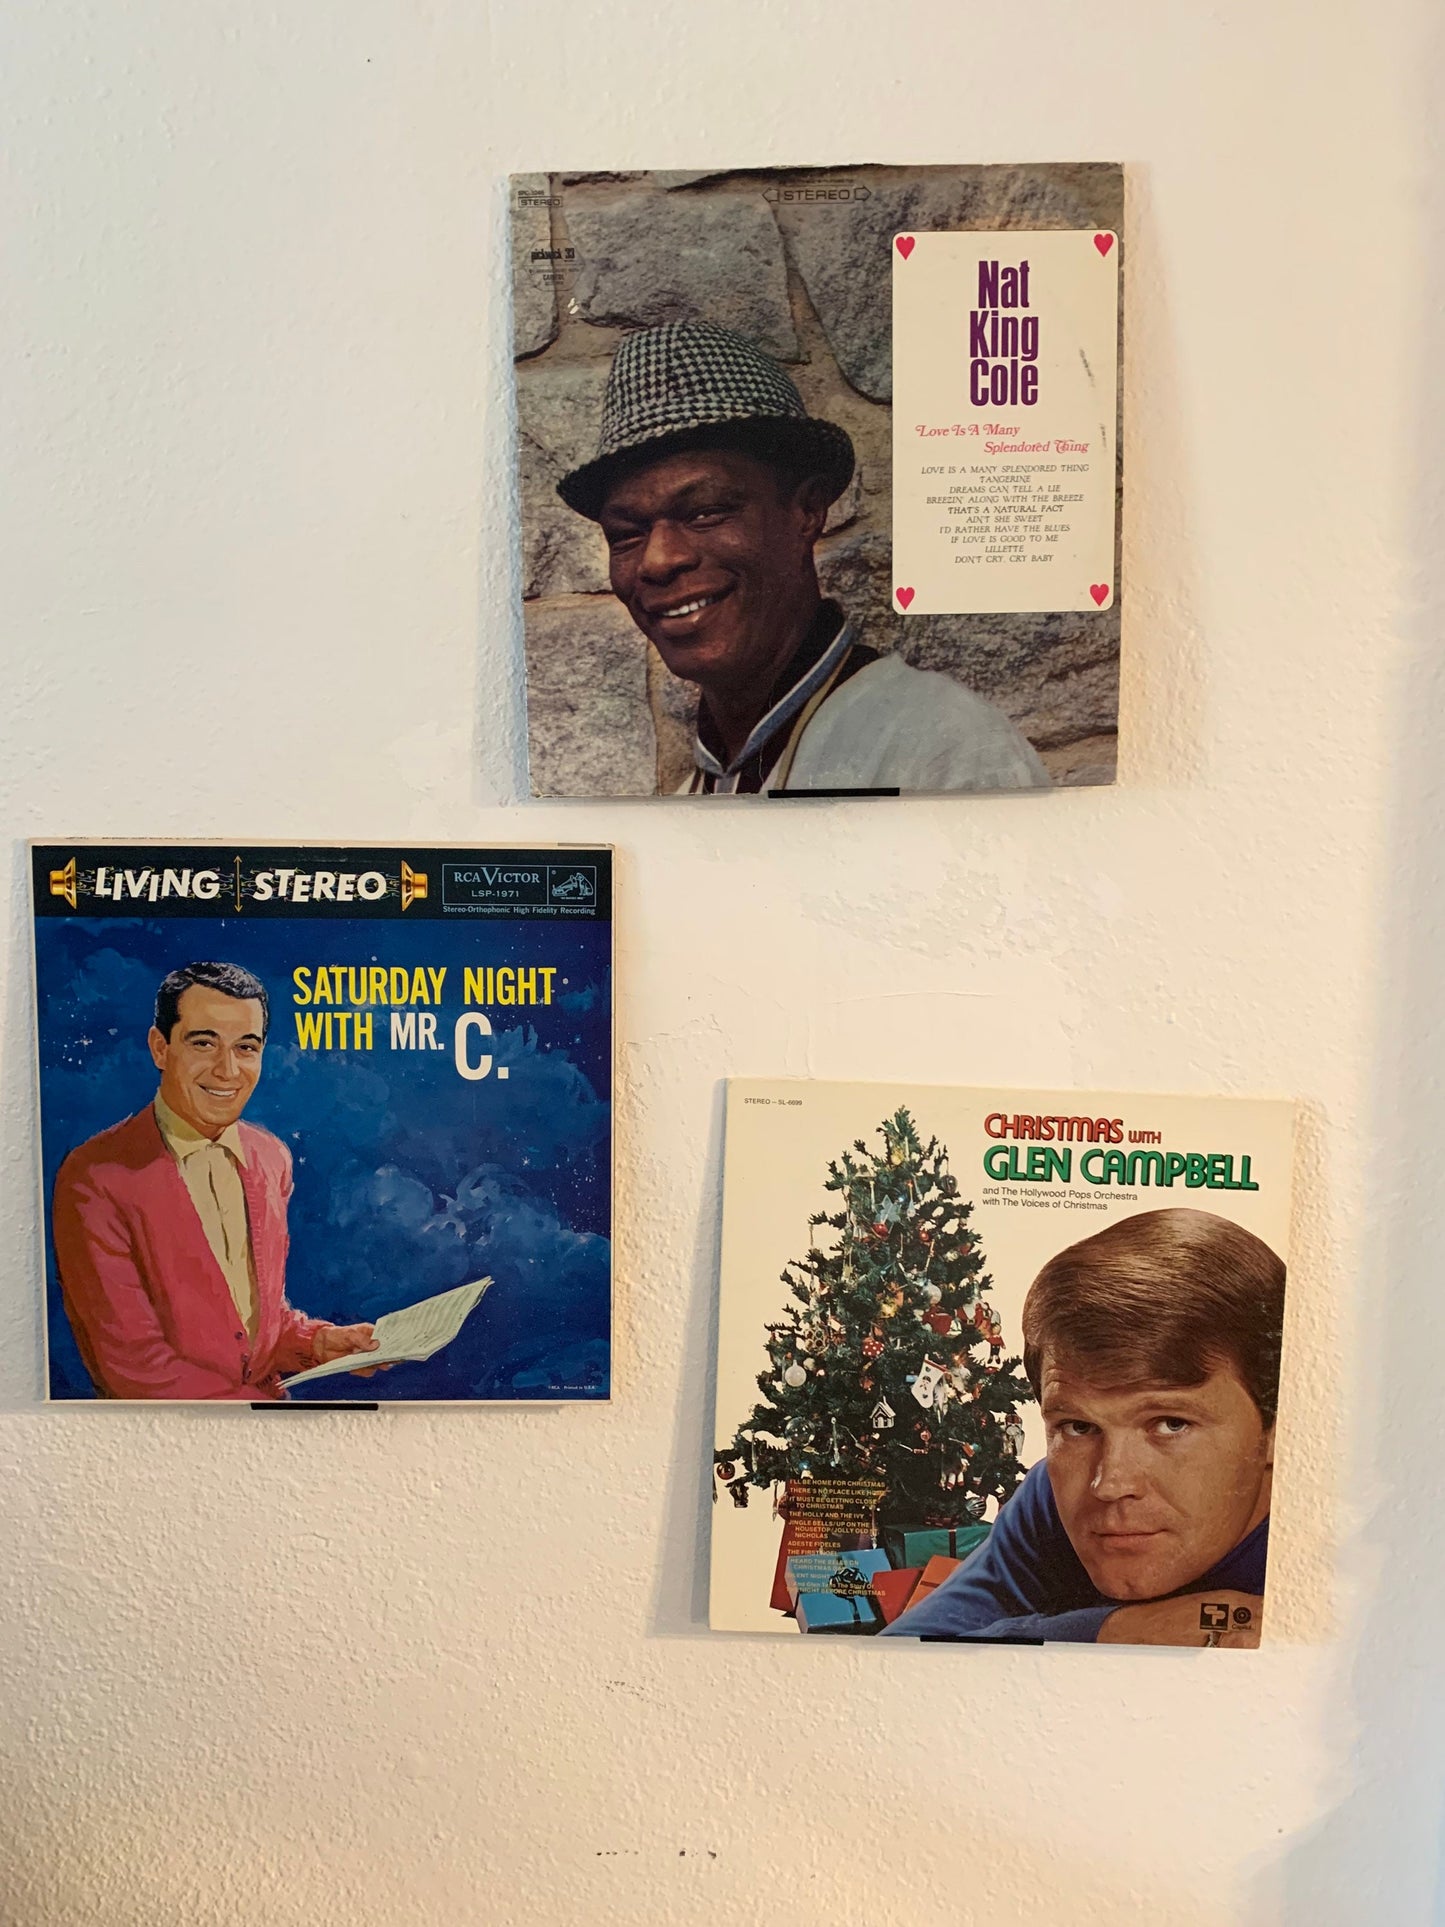 Record Wall Mount